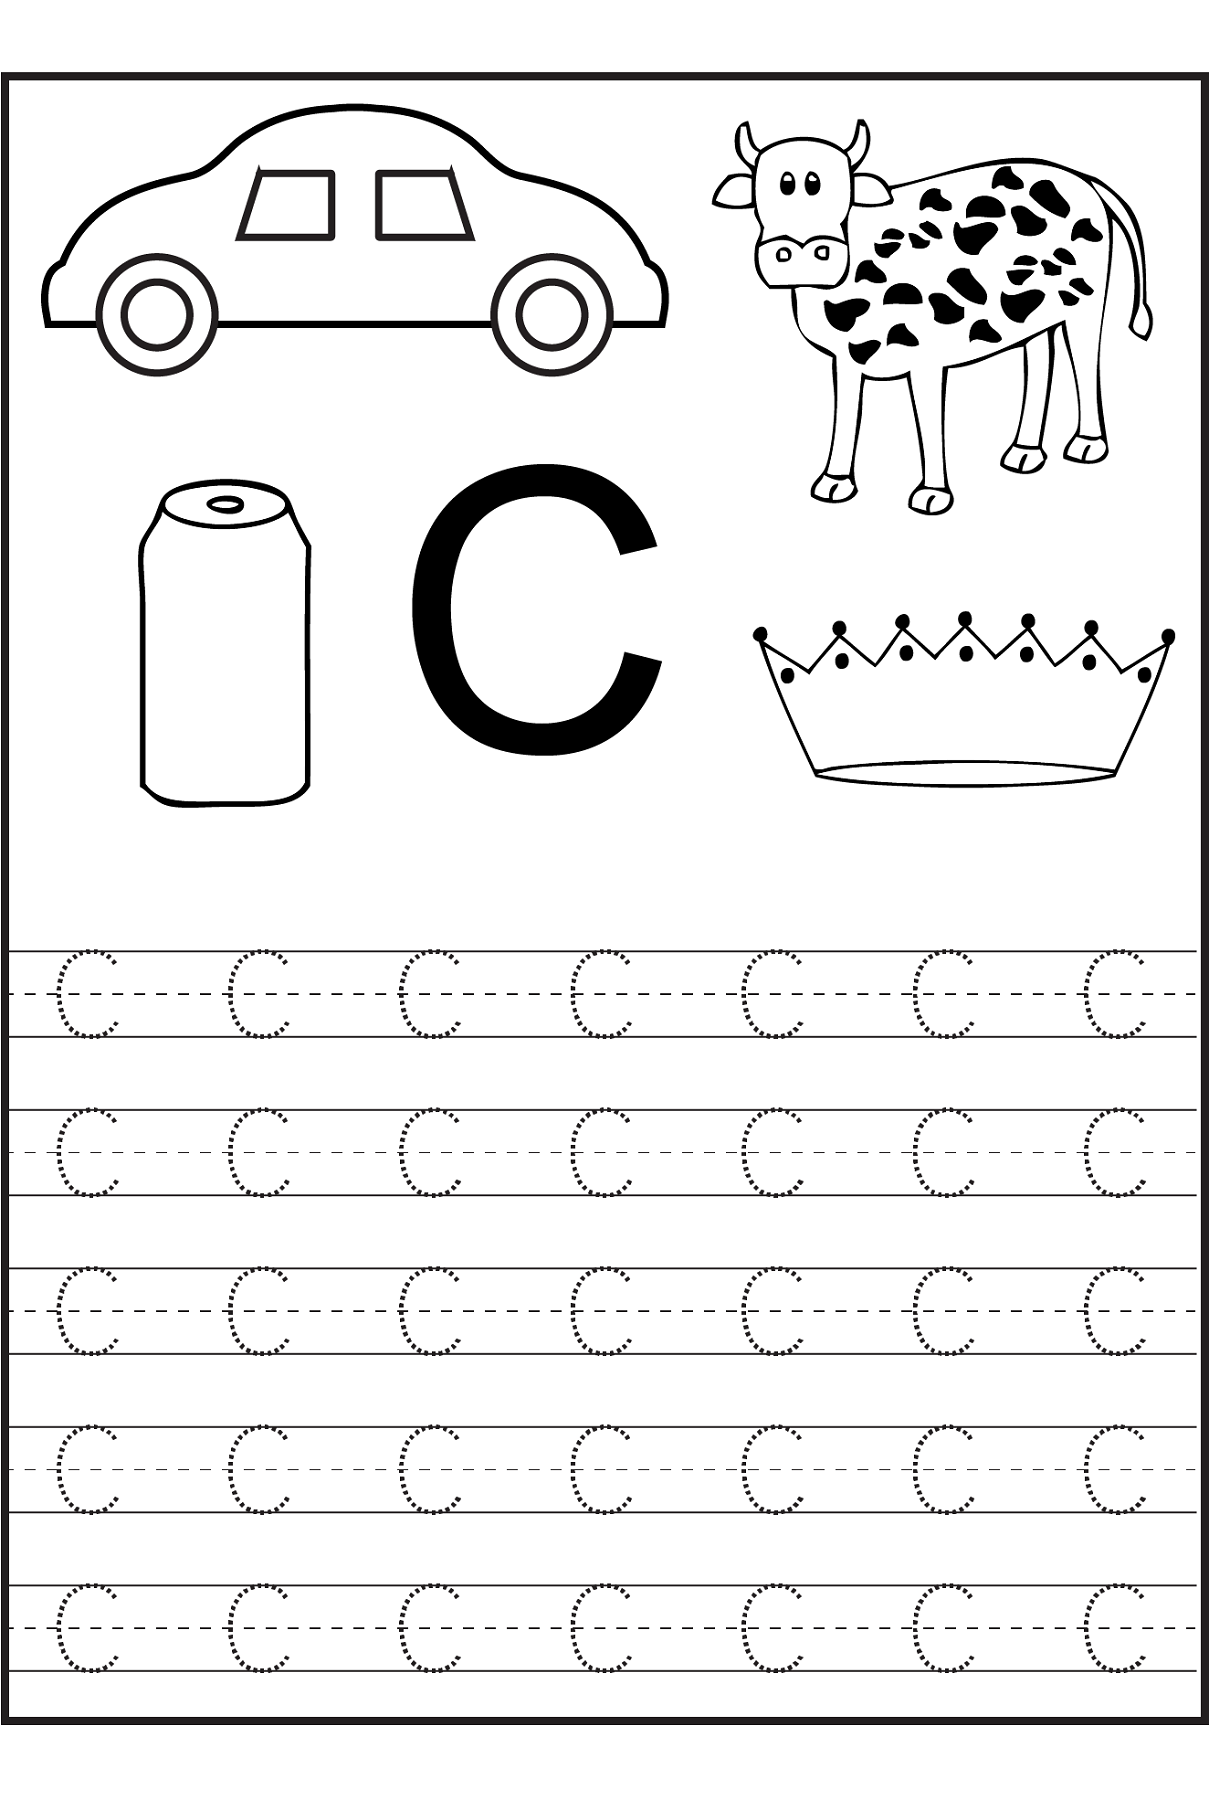 Trace The Letter C Worksheets | Free Preschool Worksheets with Letter C Worksheets For Preschool